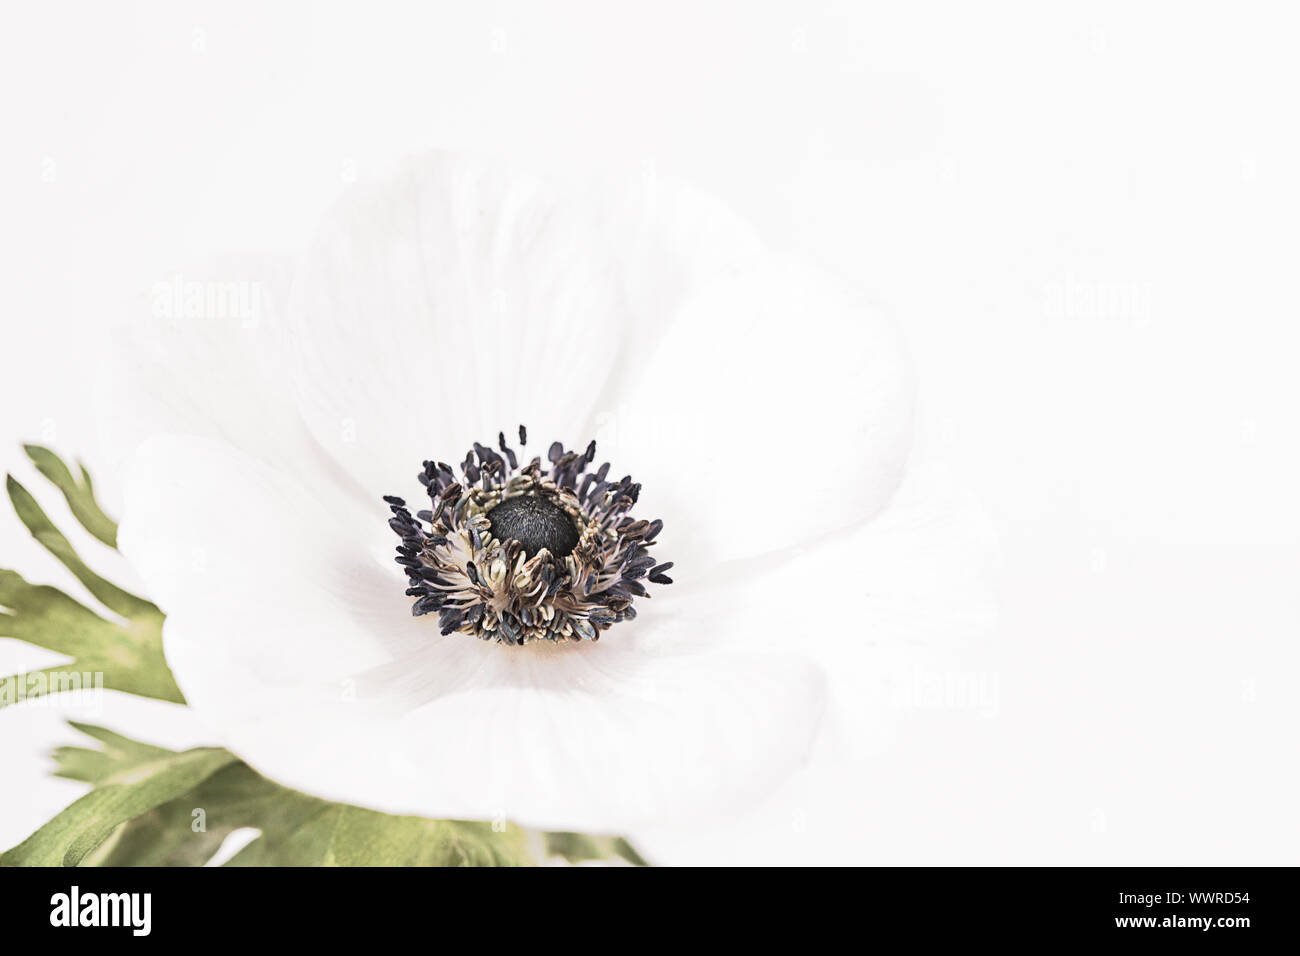 Study of a white Anemone Coronaria on white background.  Negative space for type and suitable for printing for wall art.  Grown from a bulb in Sprint. Stock Photo